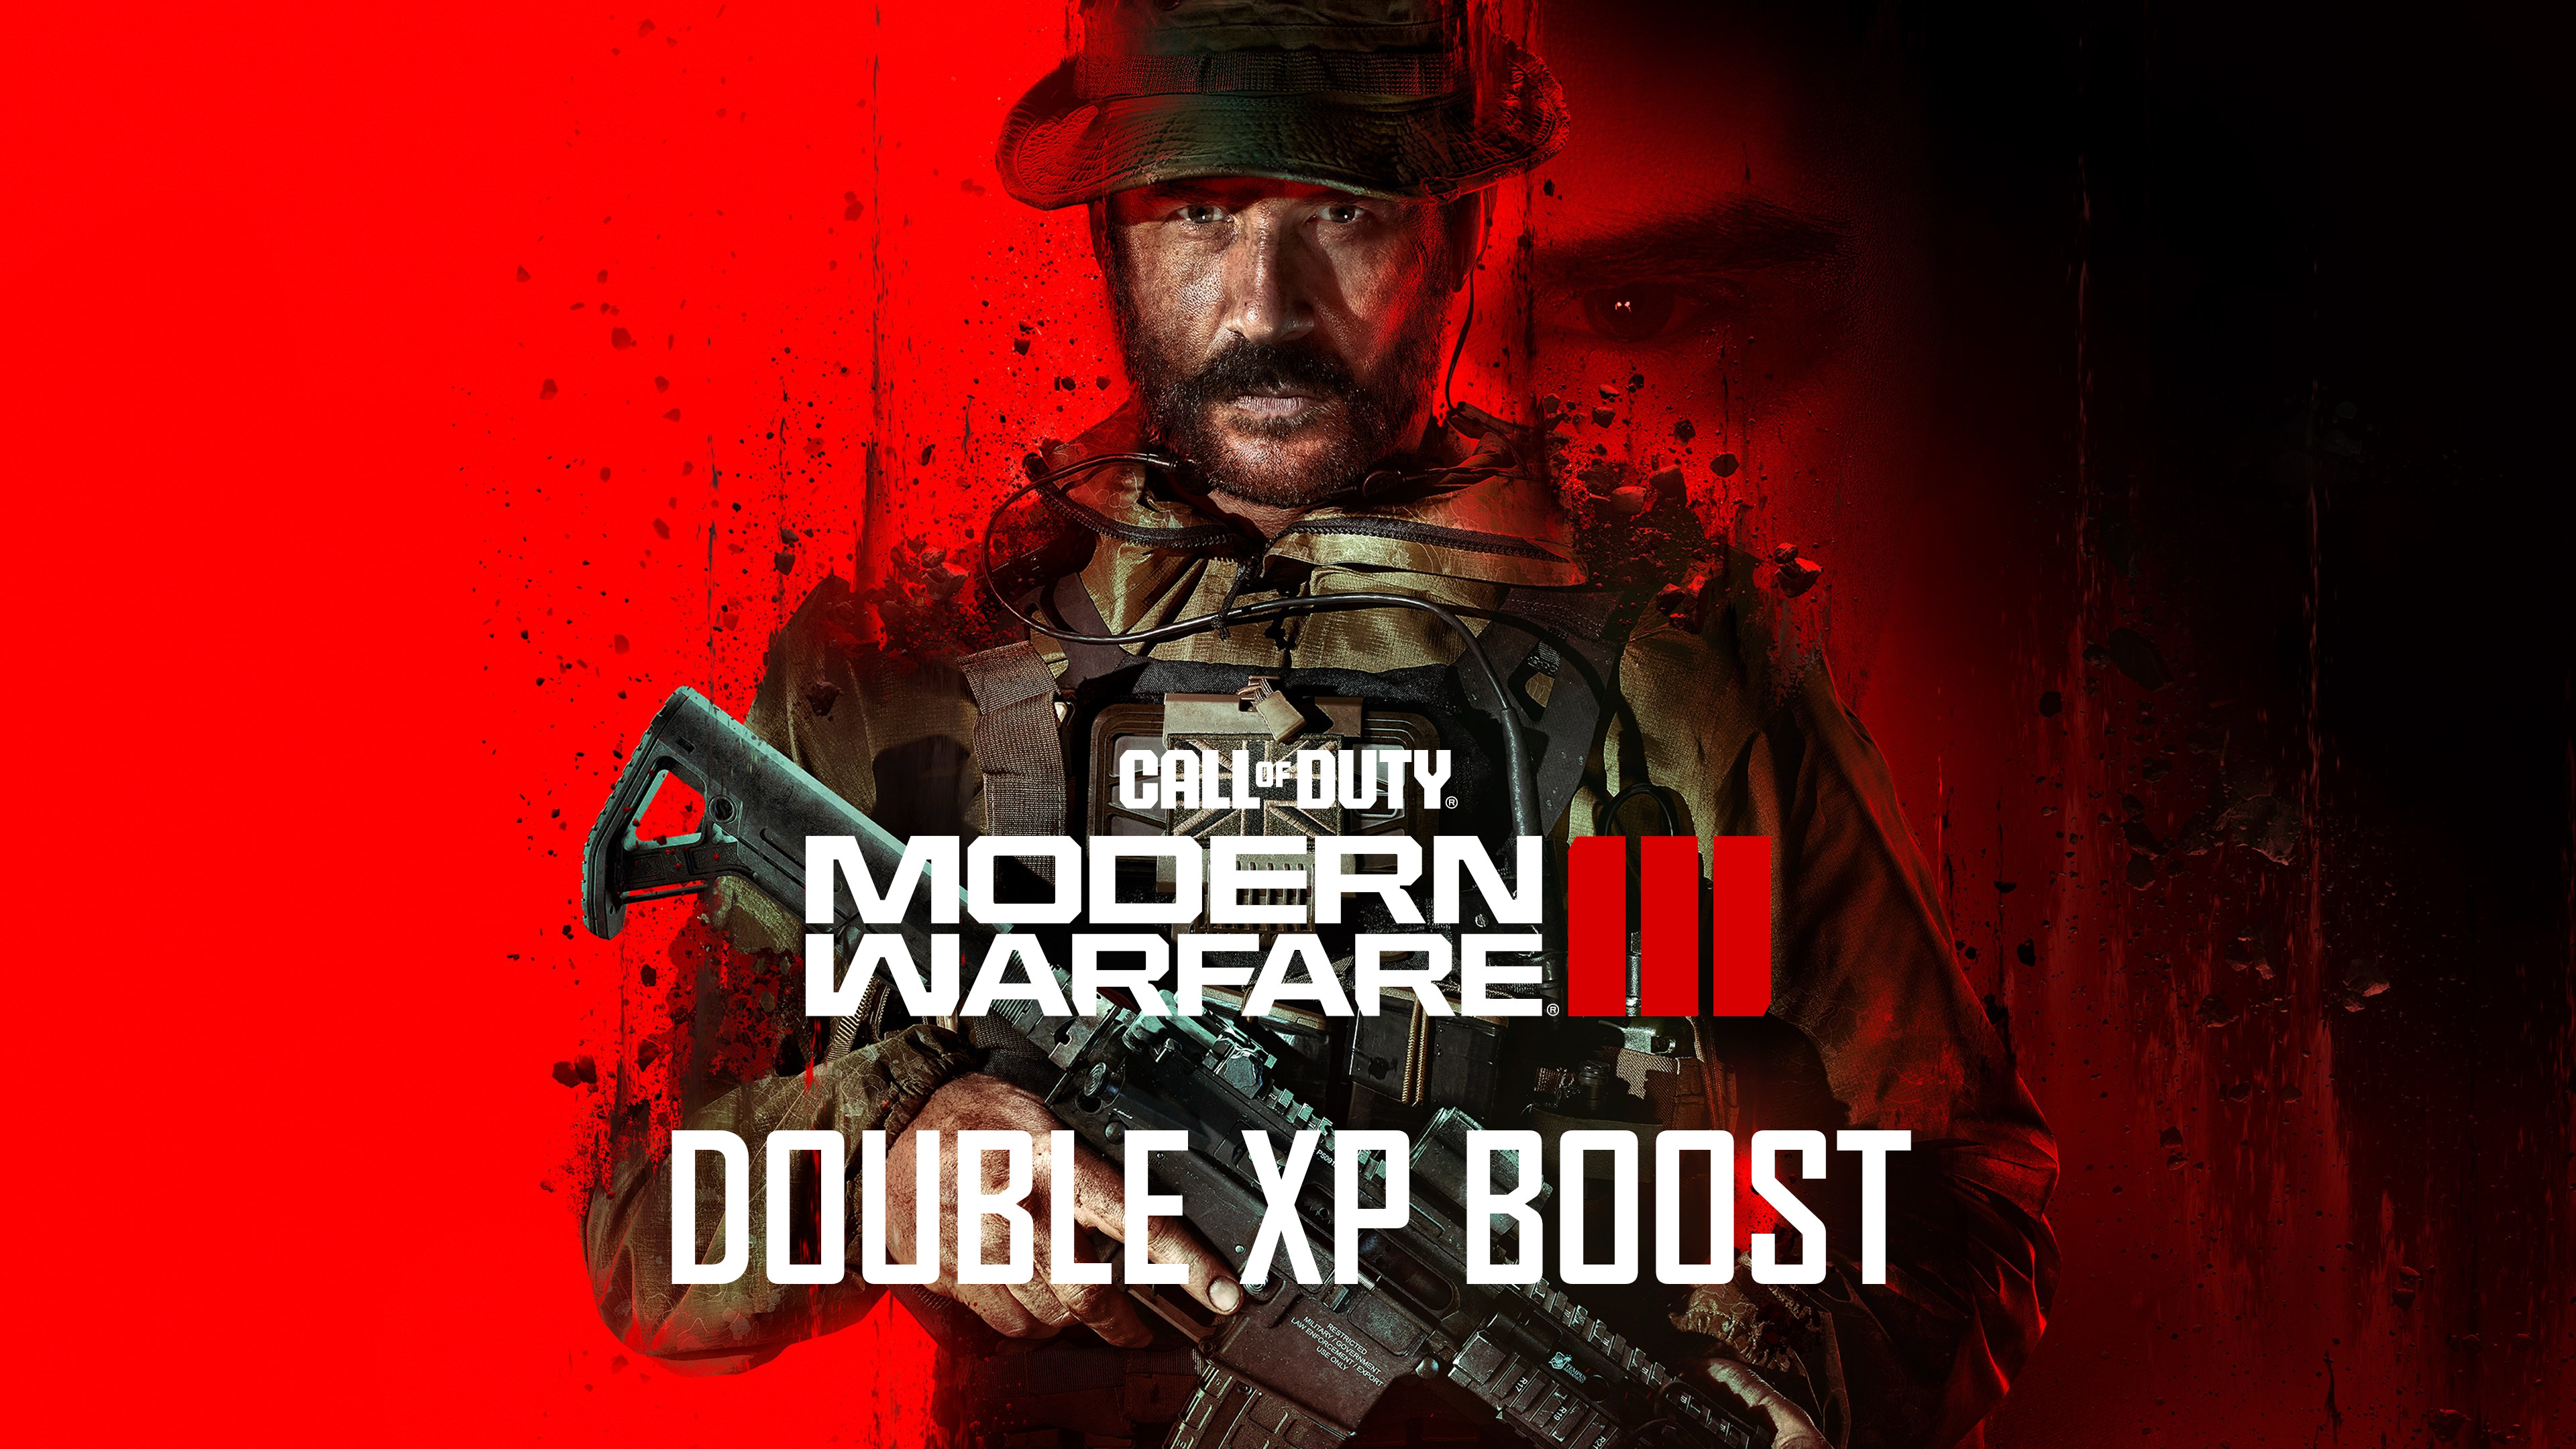 Call of Duty: Modern Warfare III - 3 Hours Double XP Boost PC/PS4/PS5/XBOX One/Series X|S CD Key 1.93 USD